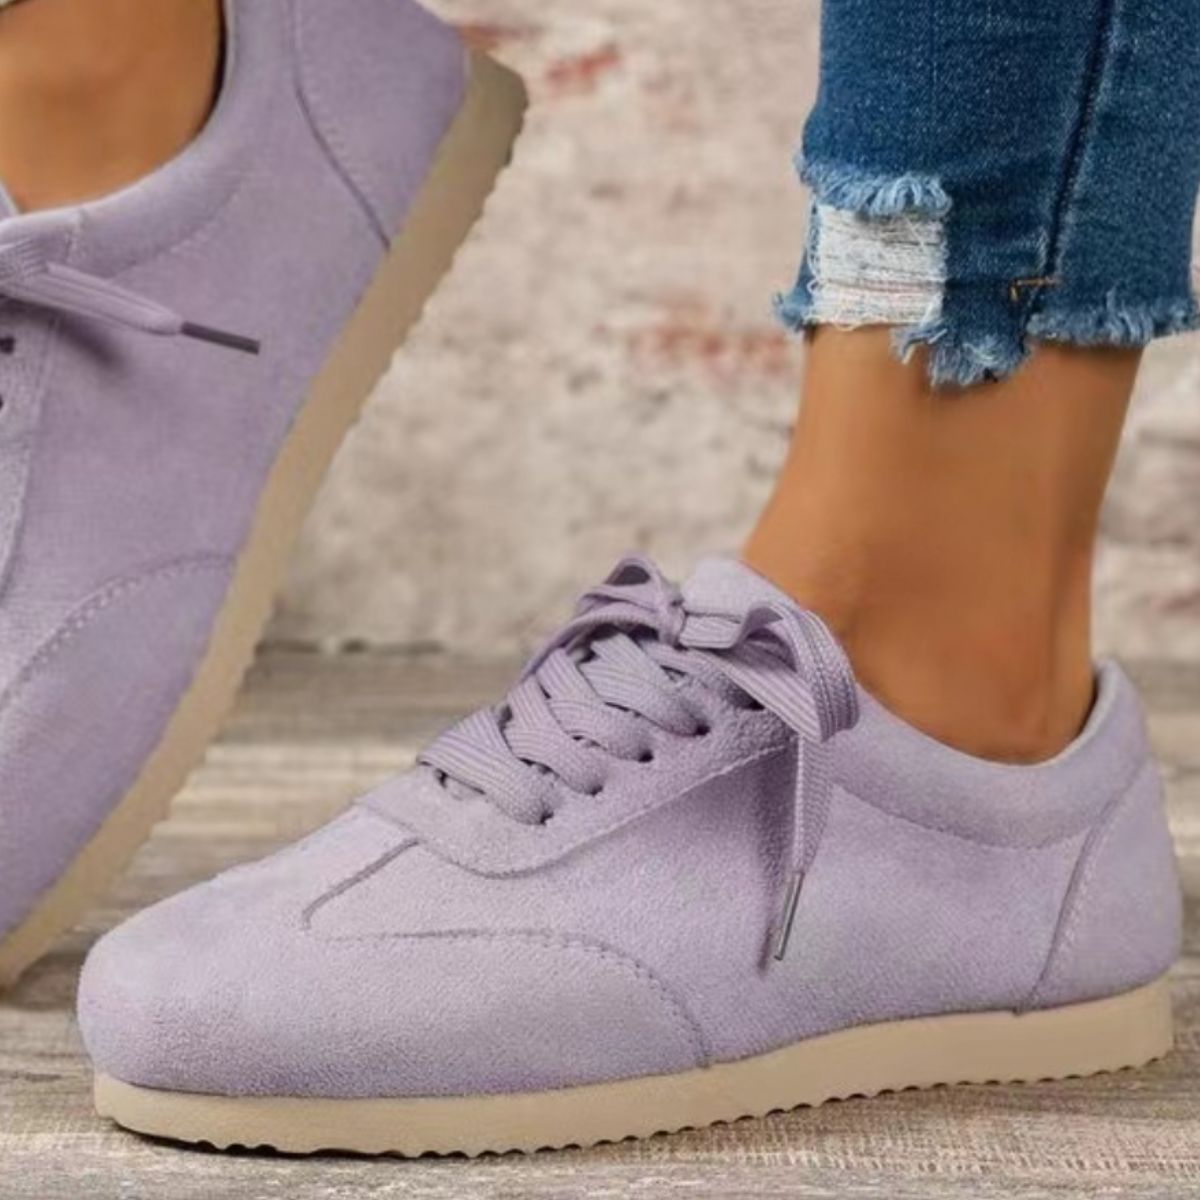 SoComfy Suede Lace-Up Flat Sneakers